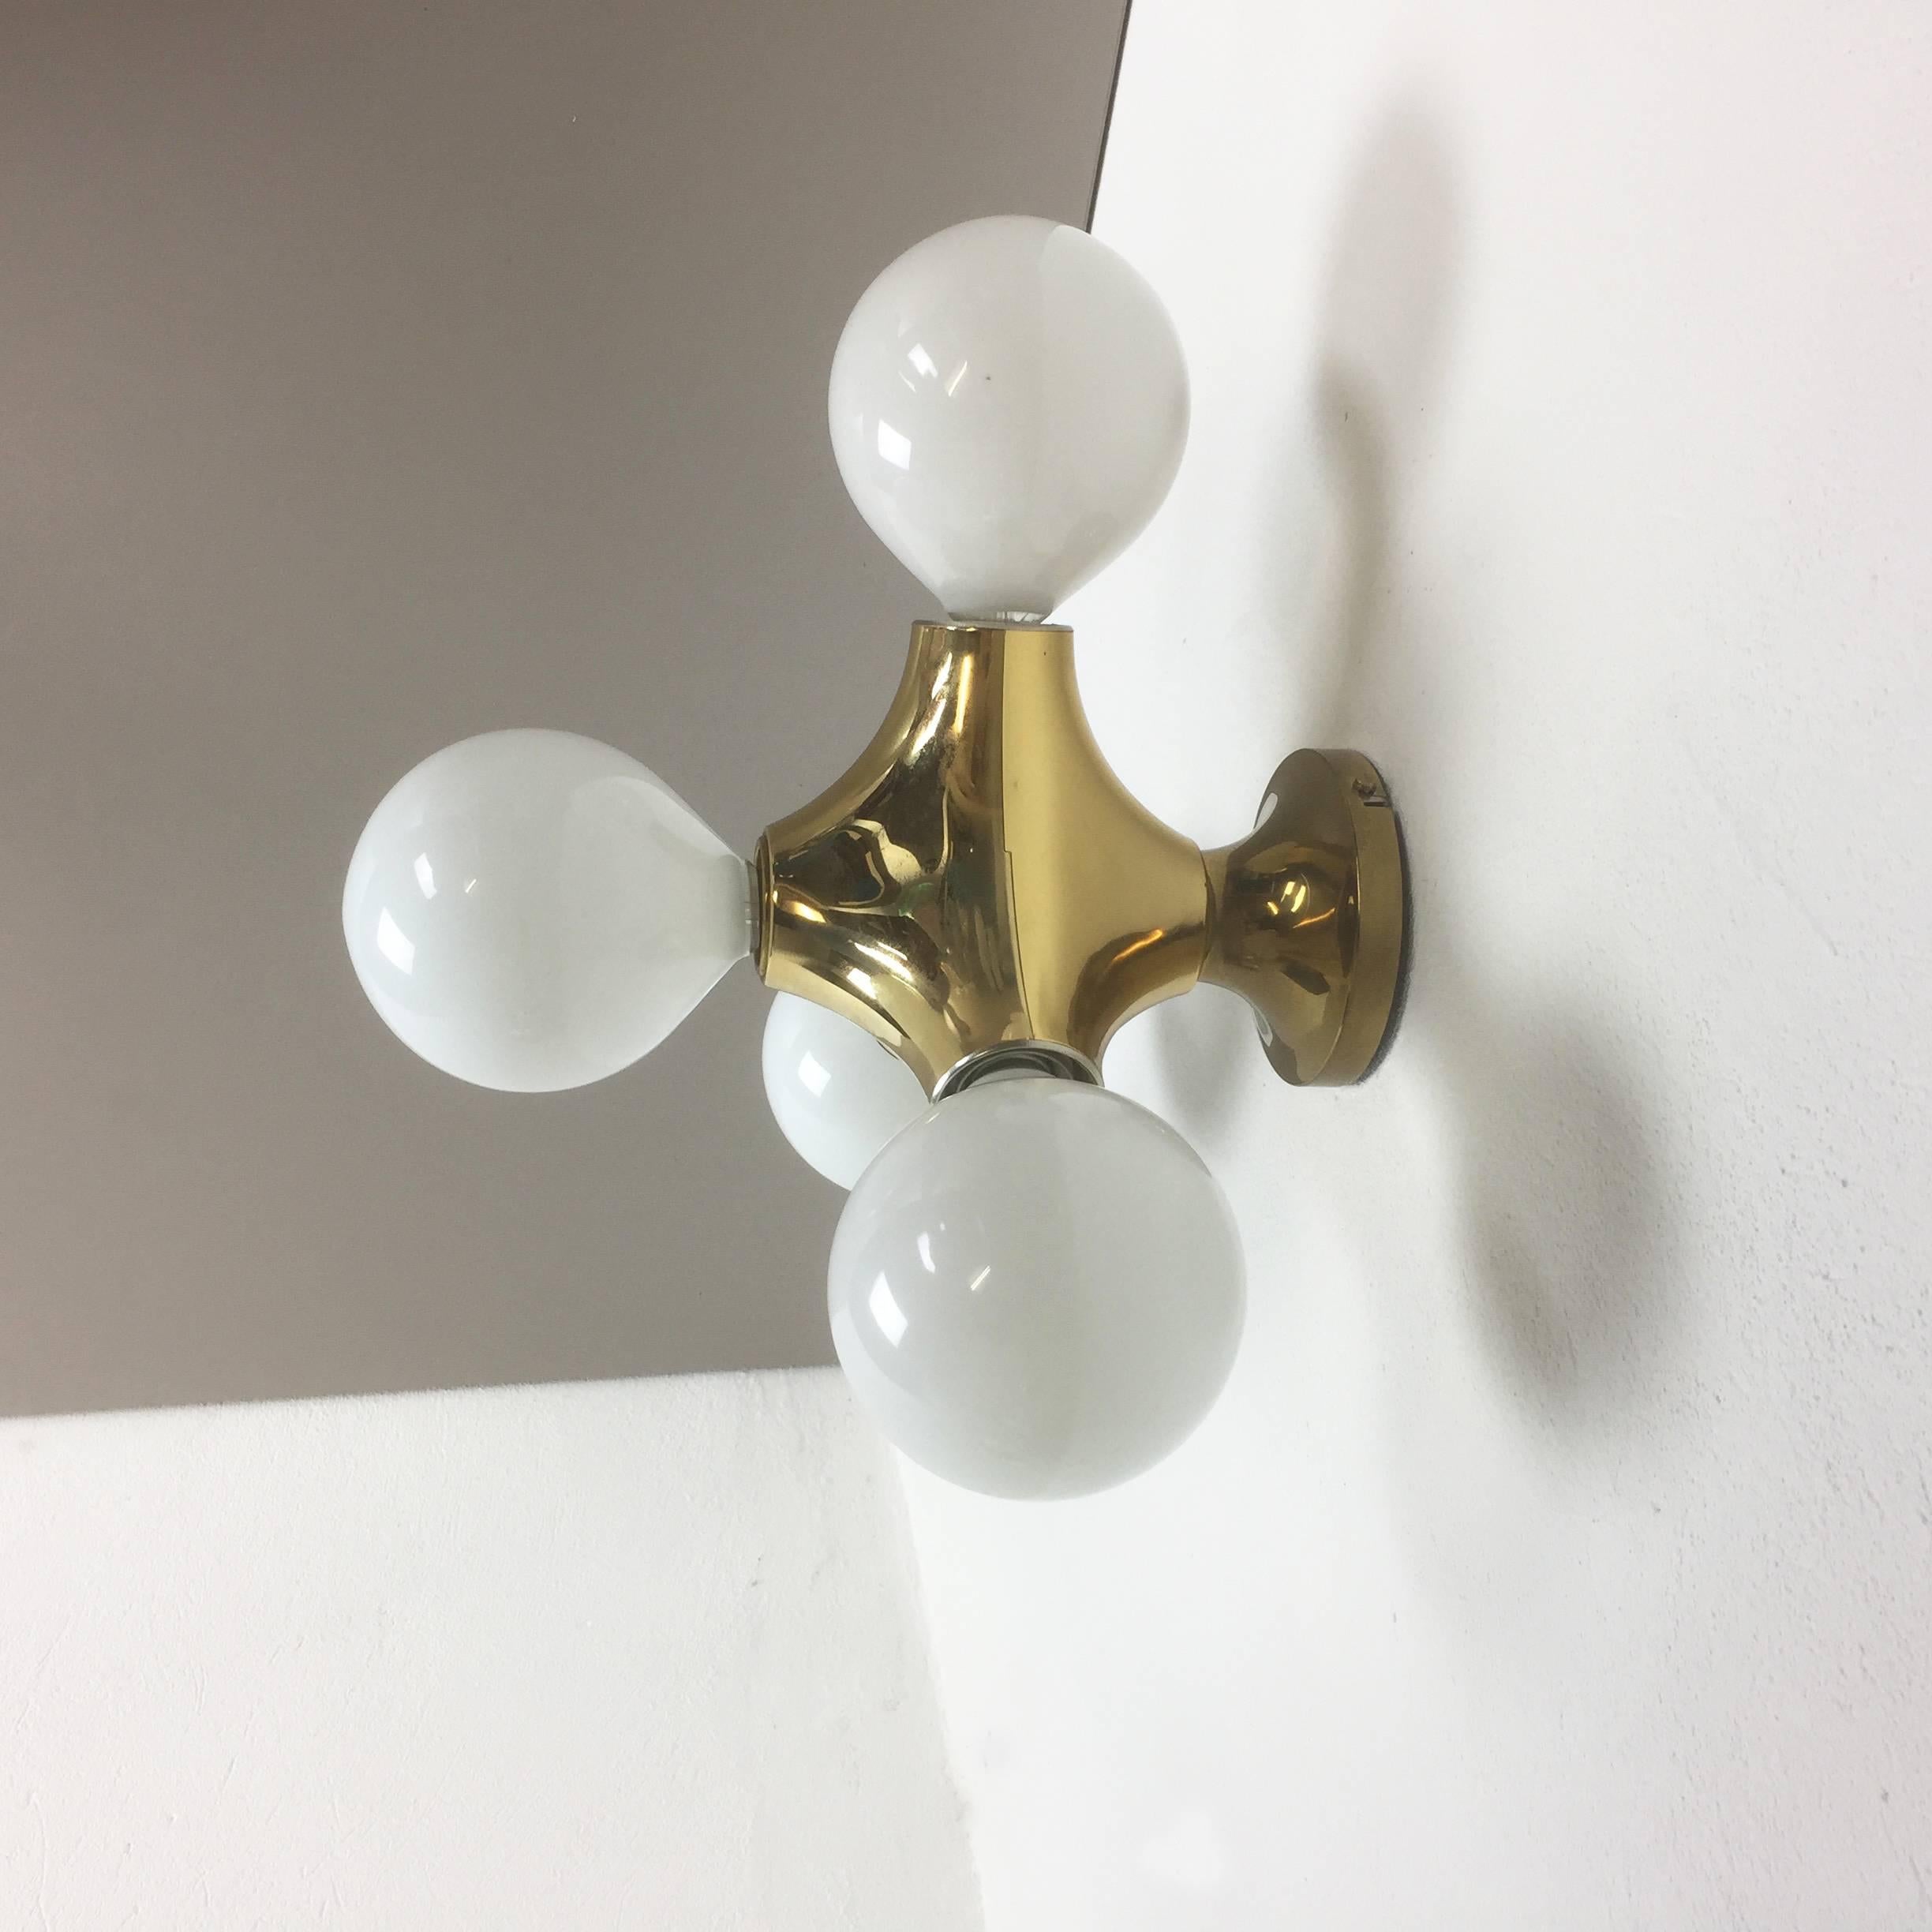 Article:

atomic light wall and ceiling light


Producer:

Cosack Lights, Germany


Origin:

Germany



Age:

1960s



Description:


This 1960s sputnik light was made by Cosack Lights in Germany. The light still features